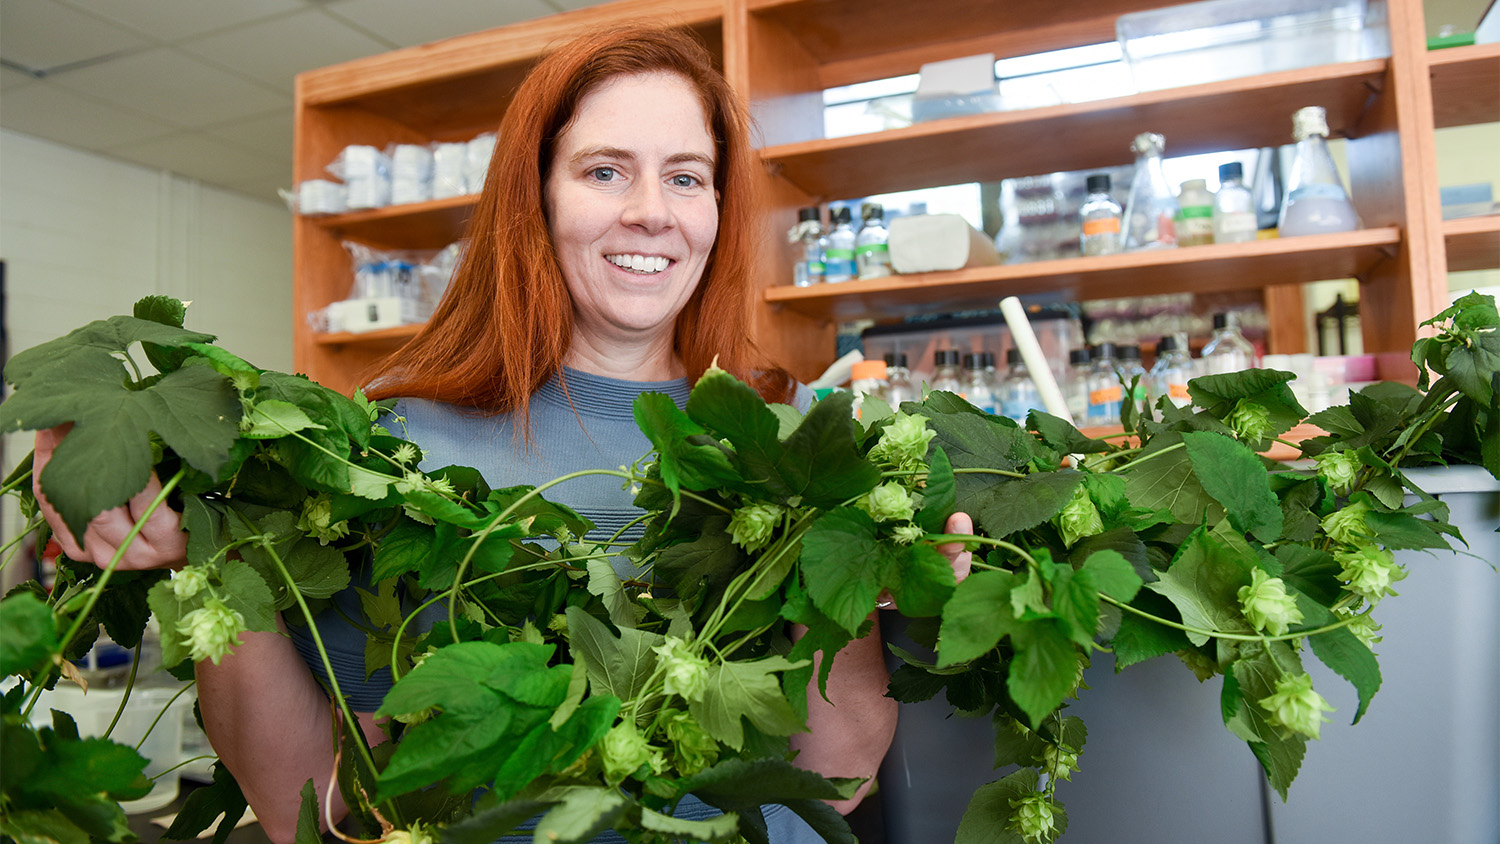 NC State's Dr. Colleen Doherty studies the circadian rhythm of plants. Among the projects she&#039;s involved with: finding ways to make hops plants more suitable for North Carolina day length.